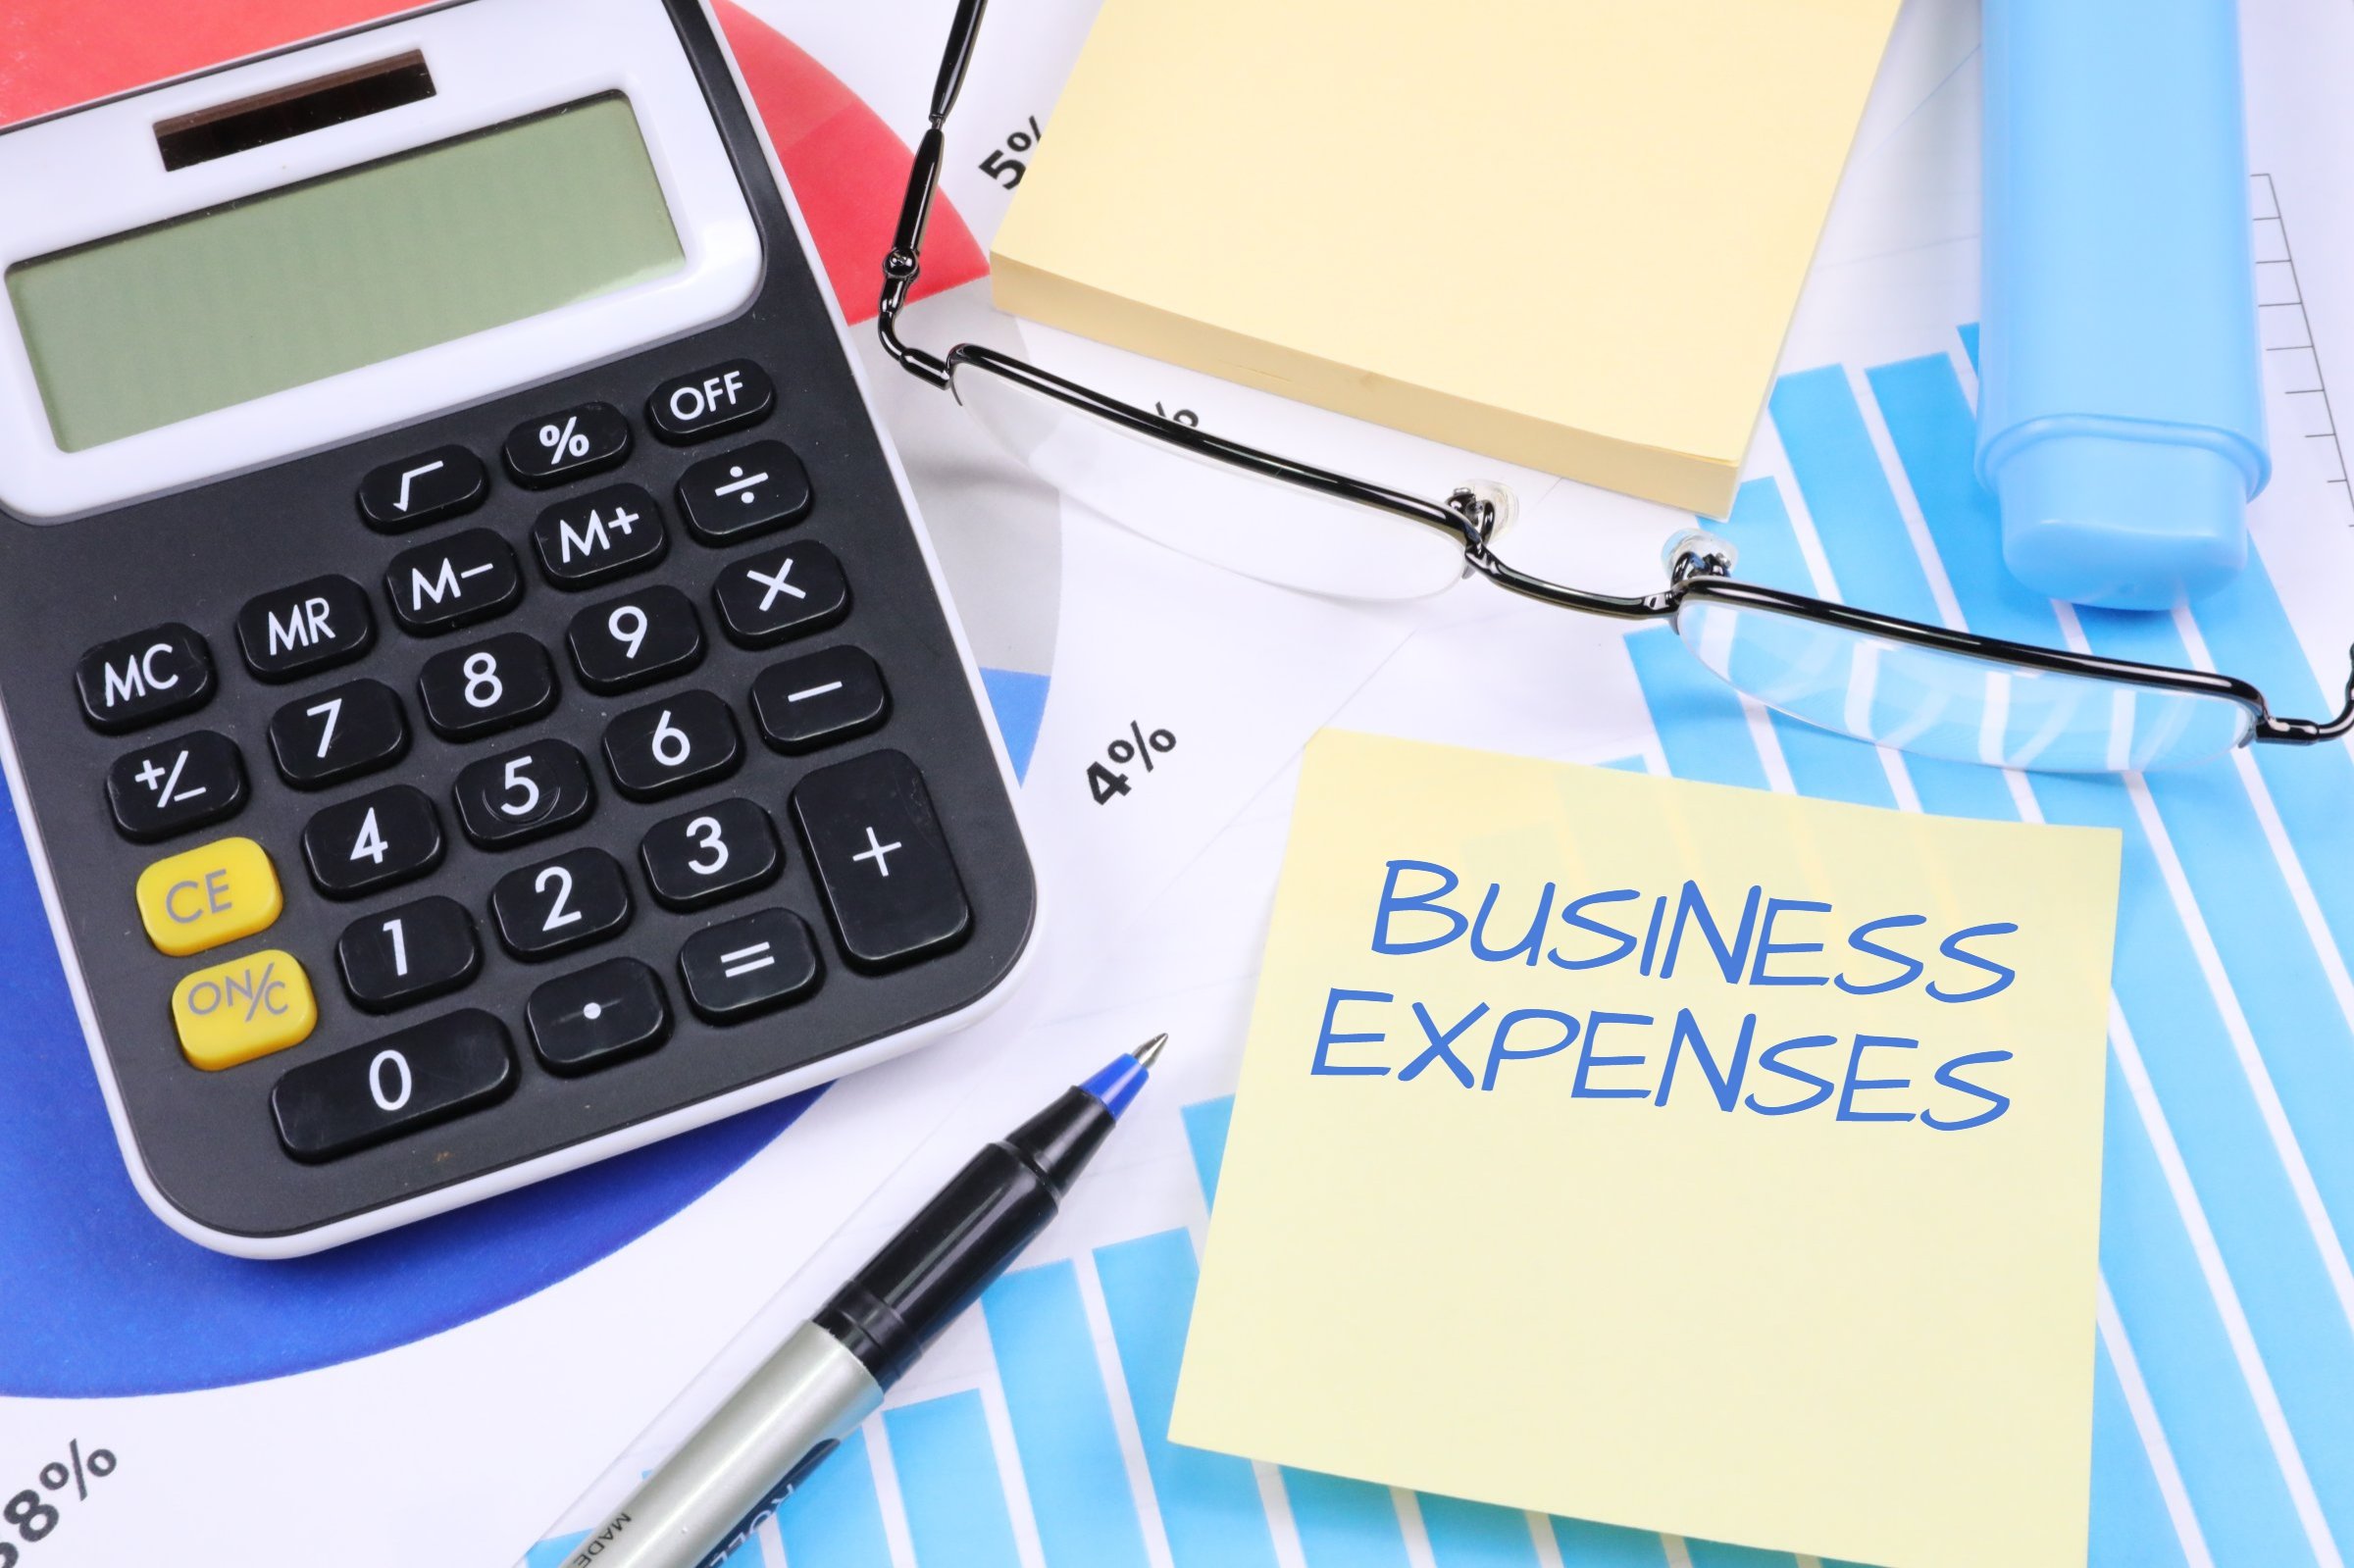 Business Expenses - Free of Charge Creative Commons Financial 9 image